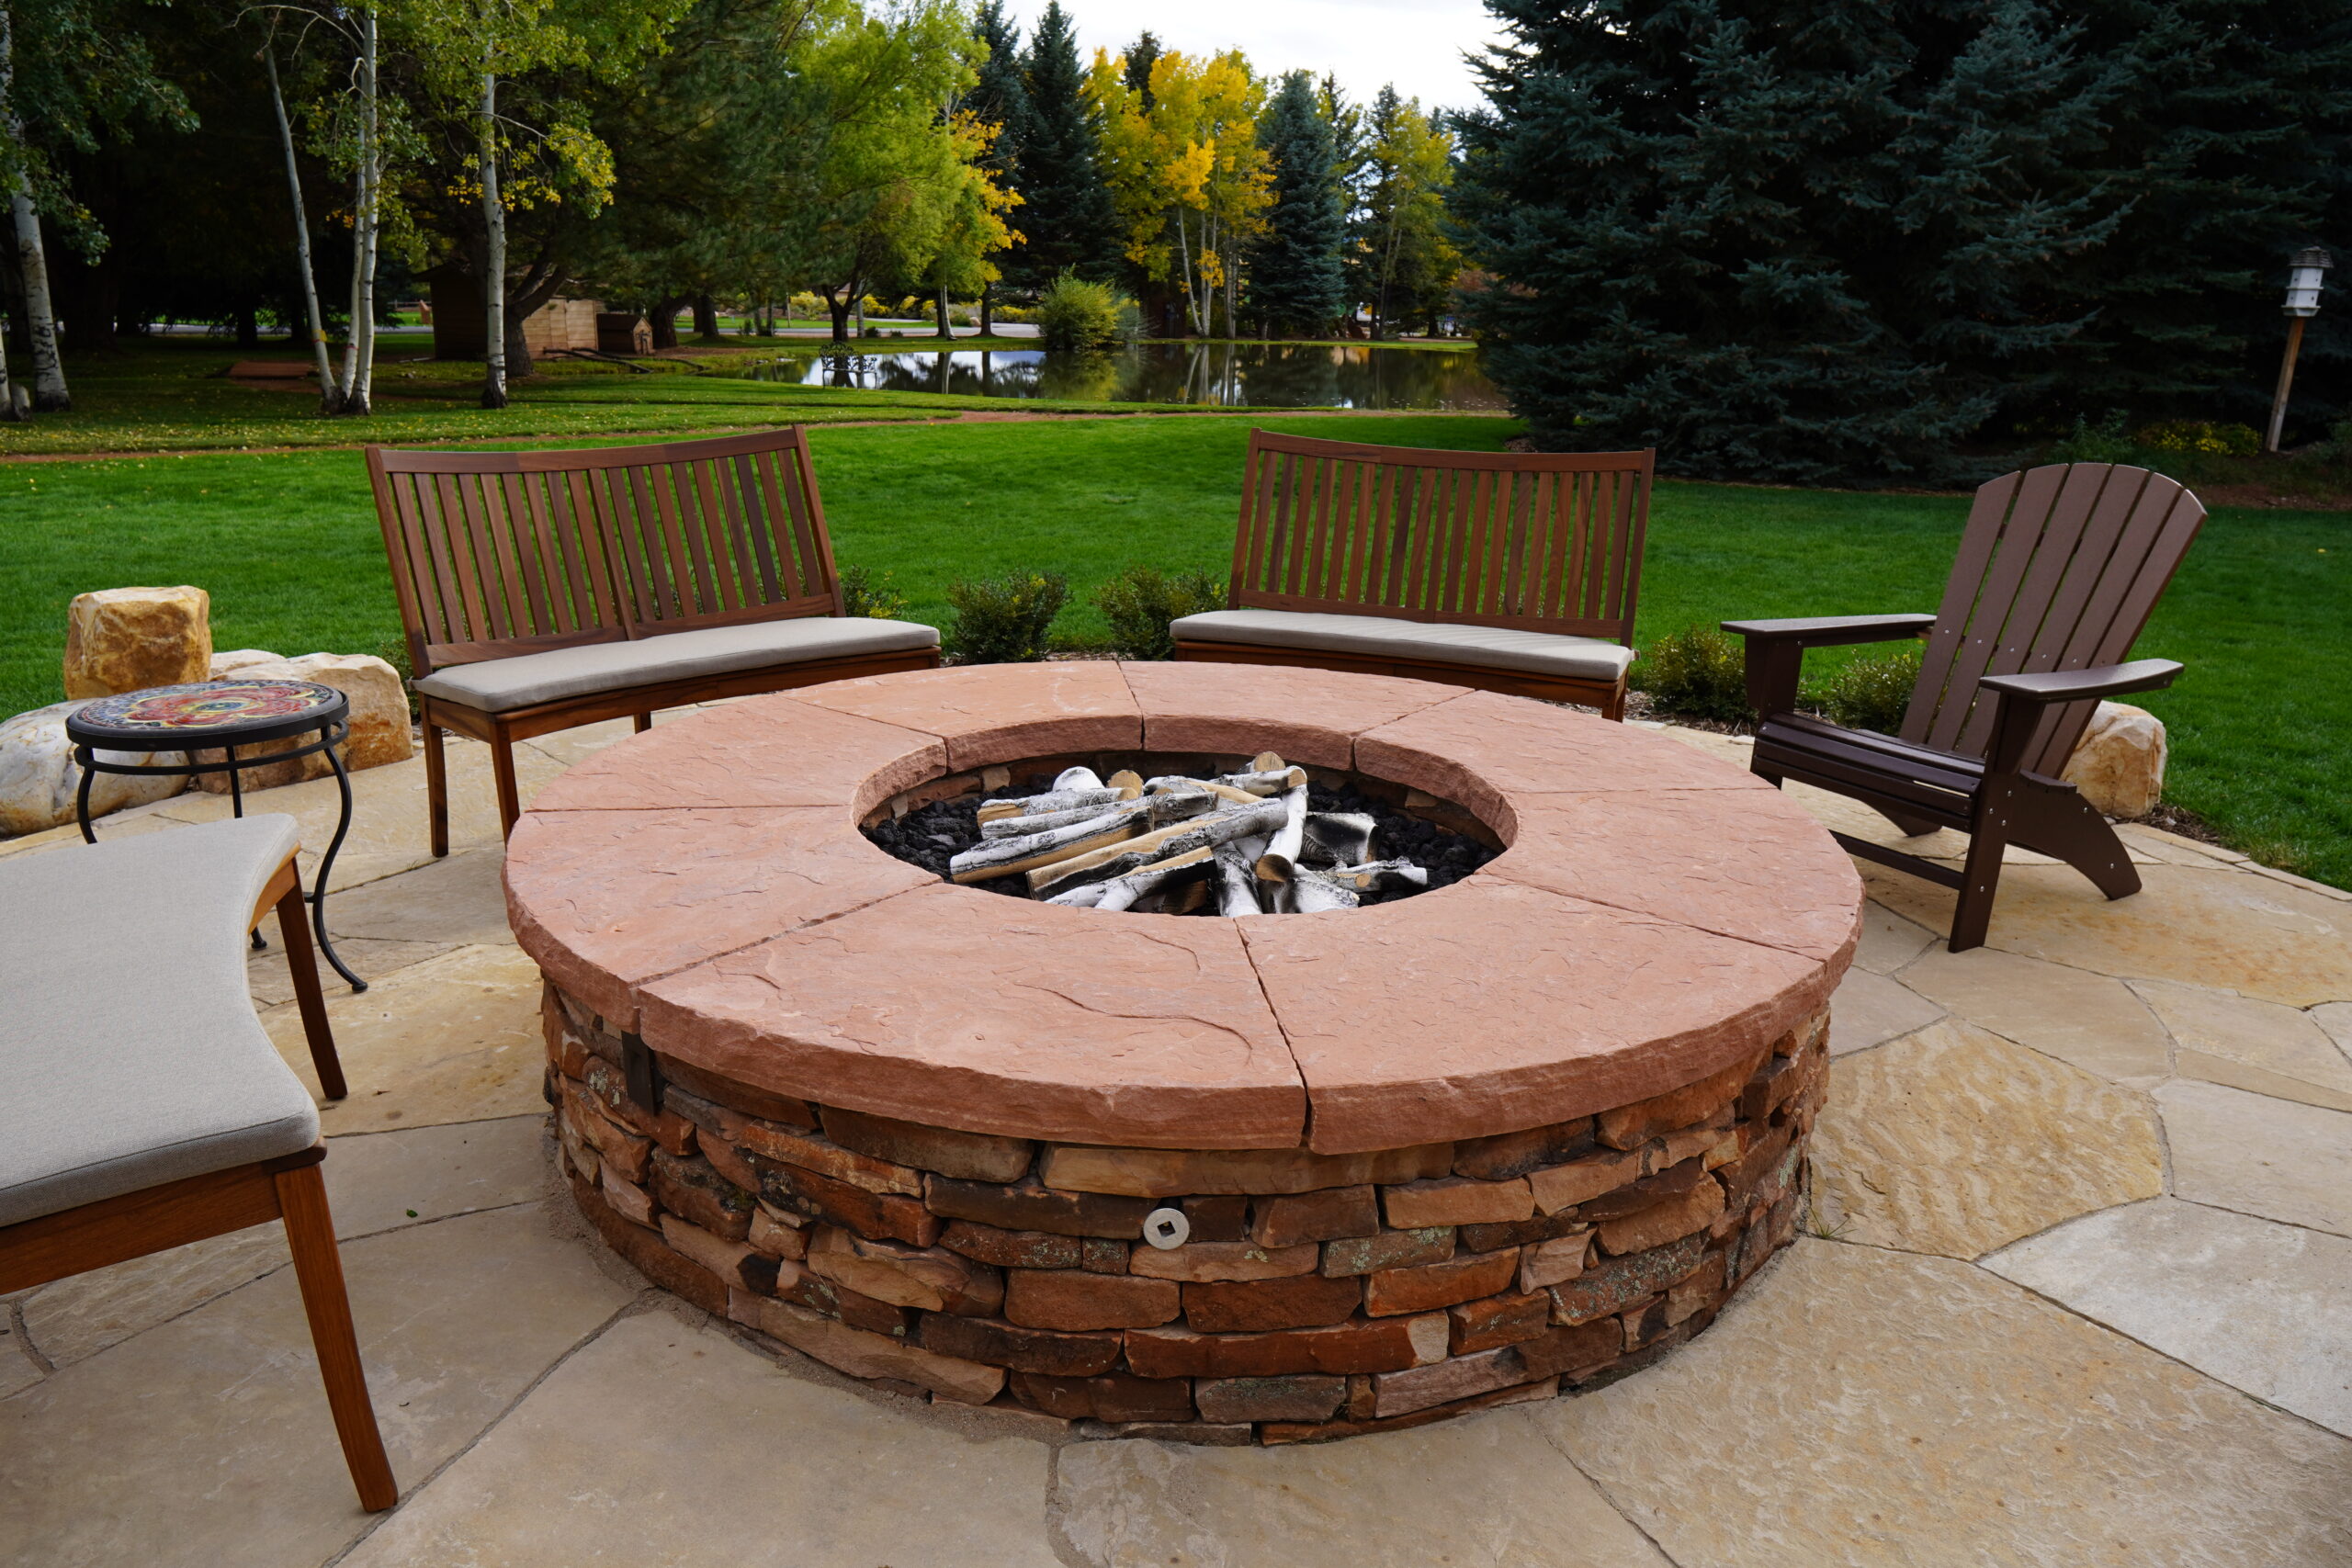 Dry laid stone fire pit with custom natural stone slab cap and integrated gas and electric utilities.